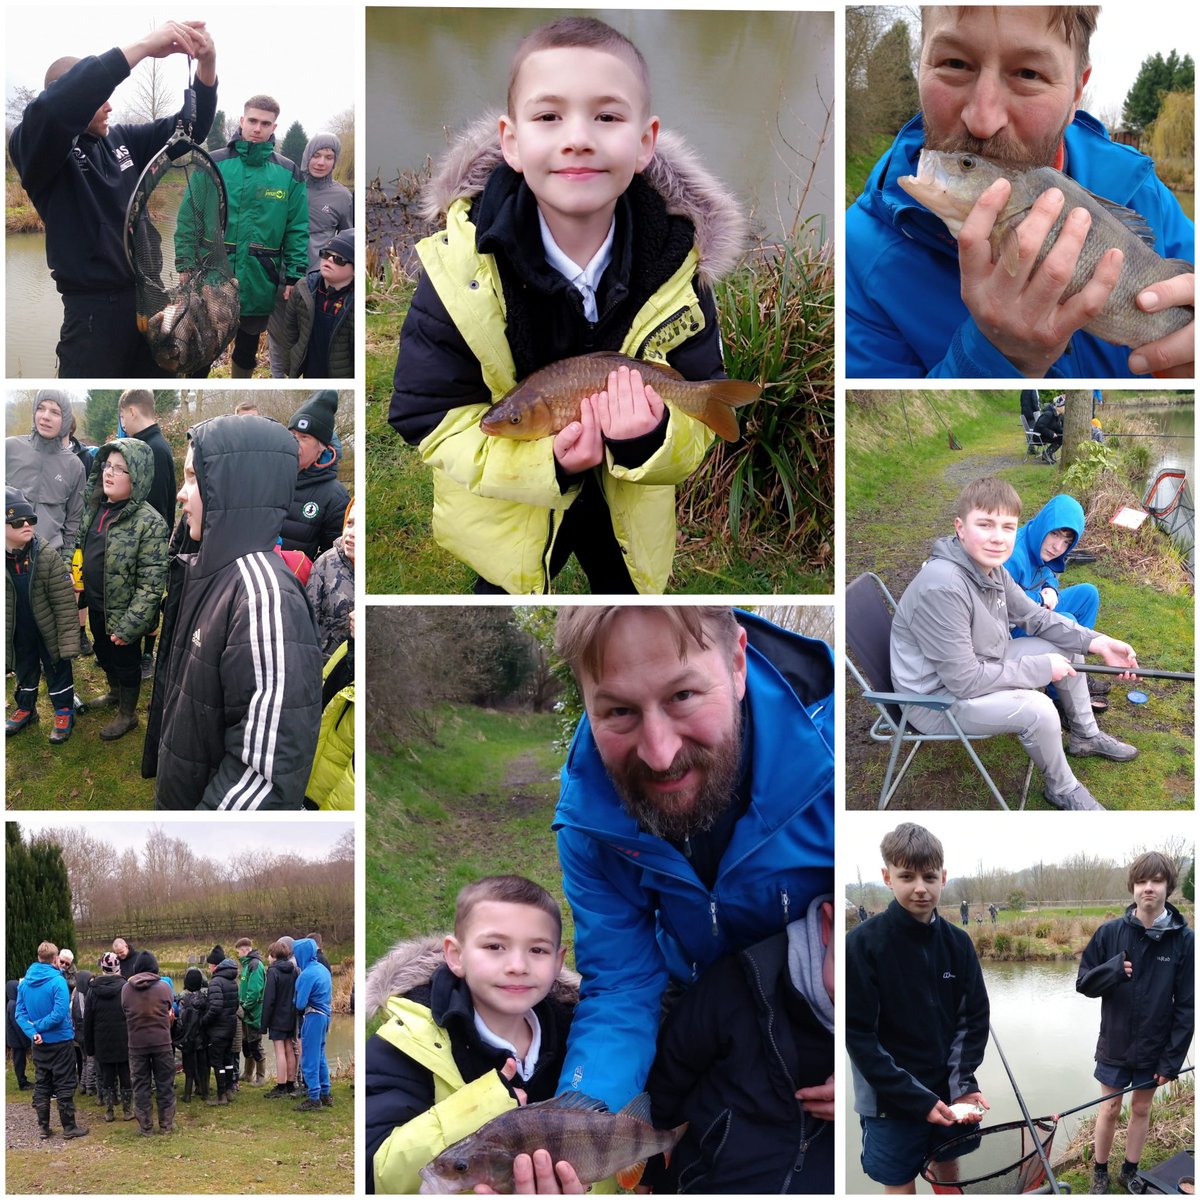 An absolute belter of a 🎣 session this week with @BarrowfordSch @IghtenhillPS @ParkPrimary_SCH @hyndburnacademy @SacredHeartcoln @PadihamPrimary.Some fantastic specimens caught during our #FeelGoodFriday 🎣 session by @BarrowfordSch inc x2 HUGE perch.@angling_times @AnglingTrust